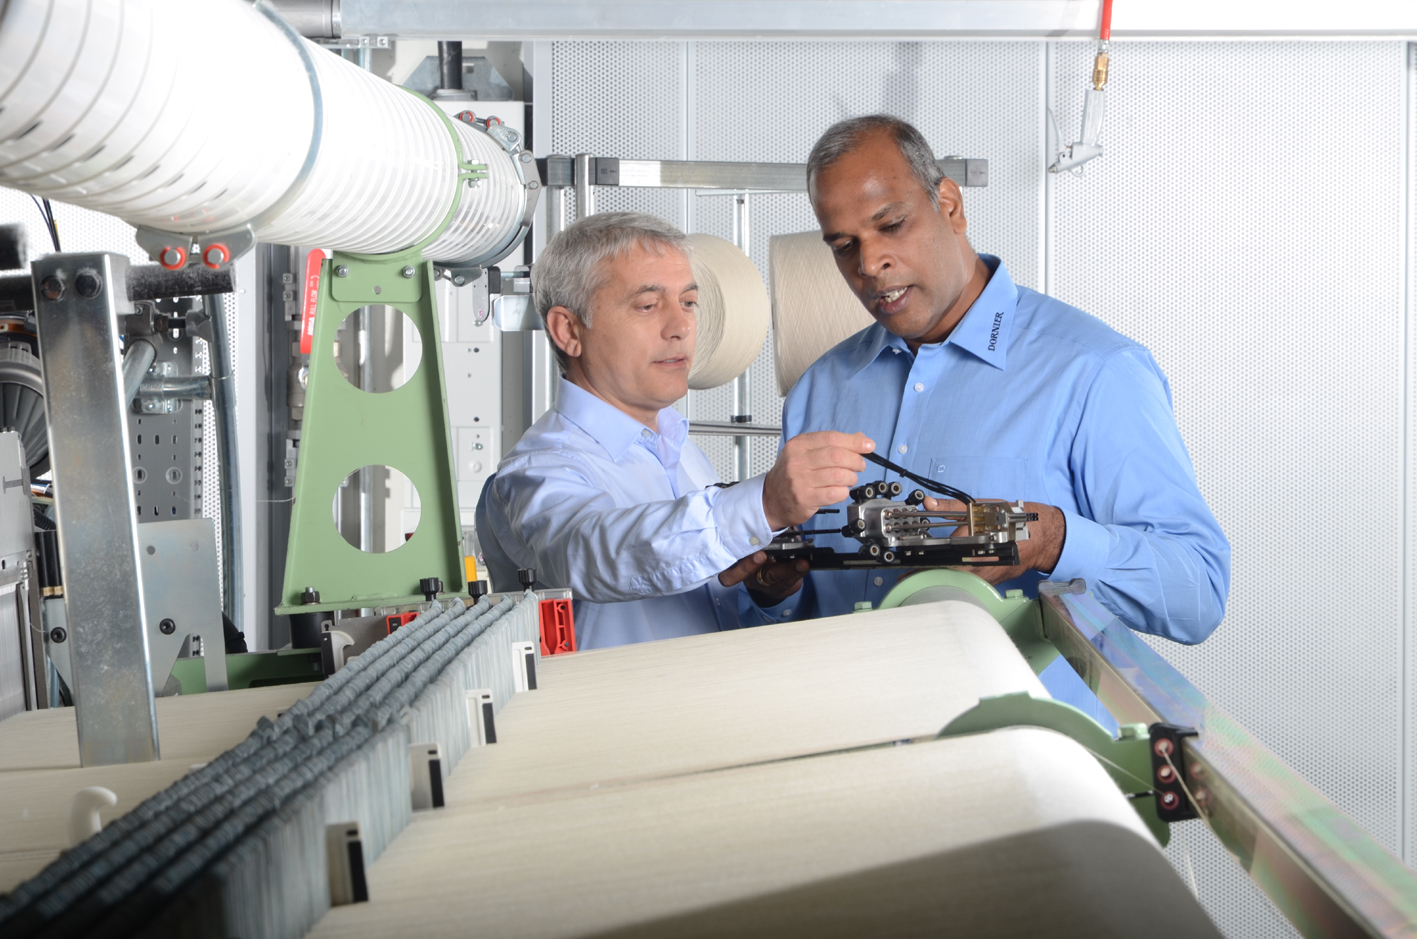 It is estimated that 60% of all woven carbon and aramid fabrics are woven on the weaving machines built at Lindauer Dornier’s plant. © Lindauer Dornier